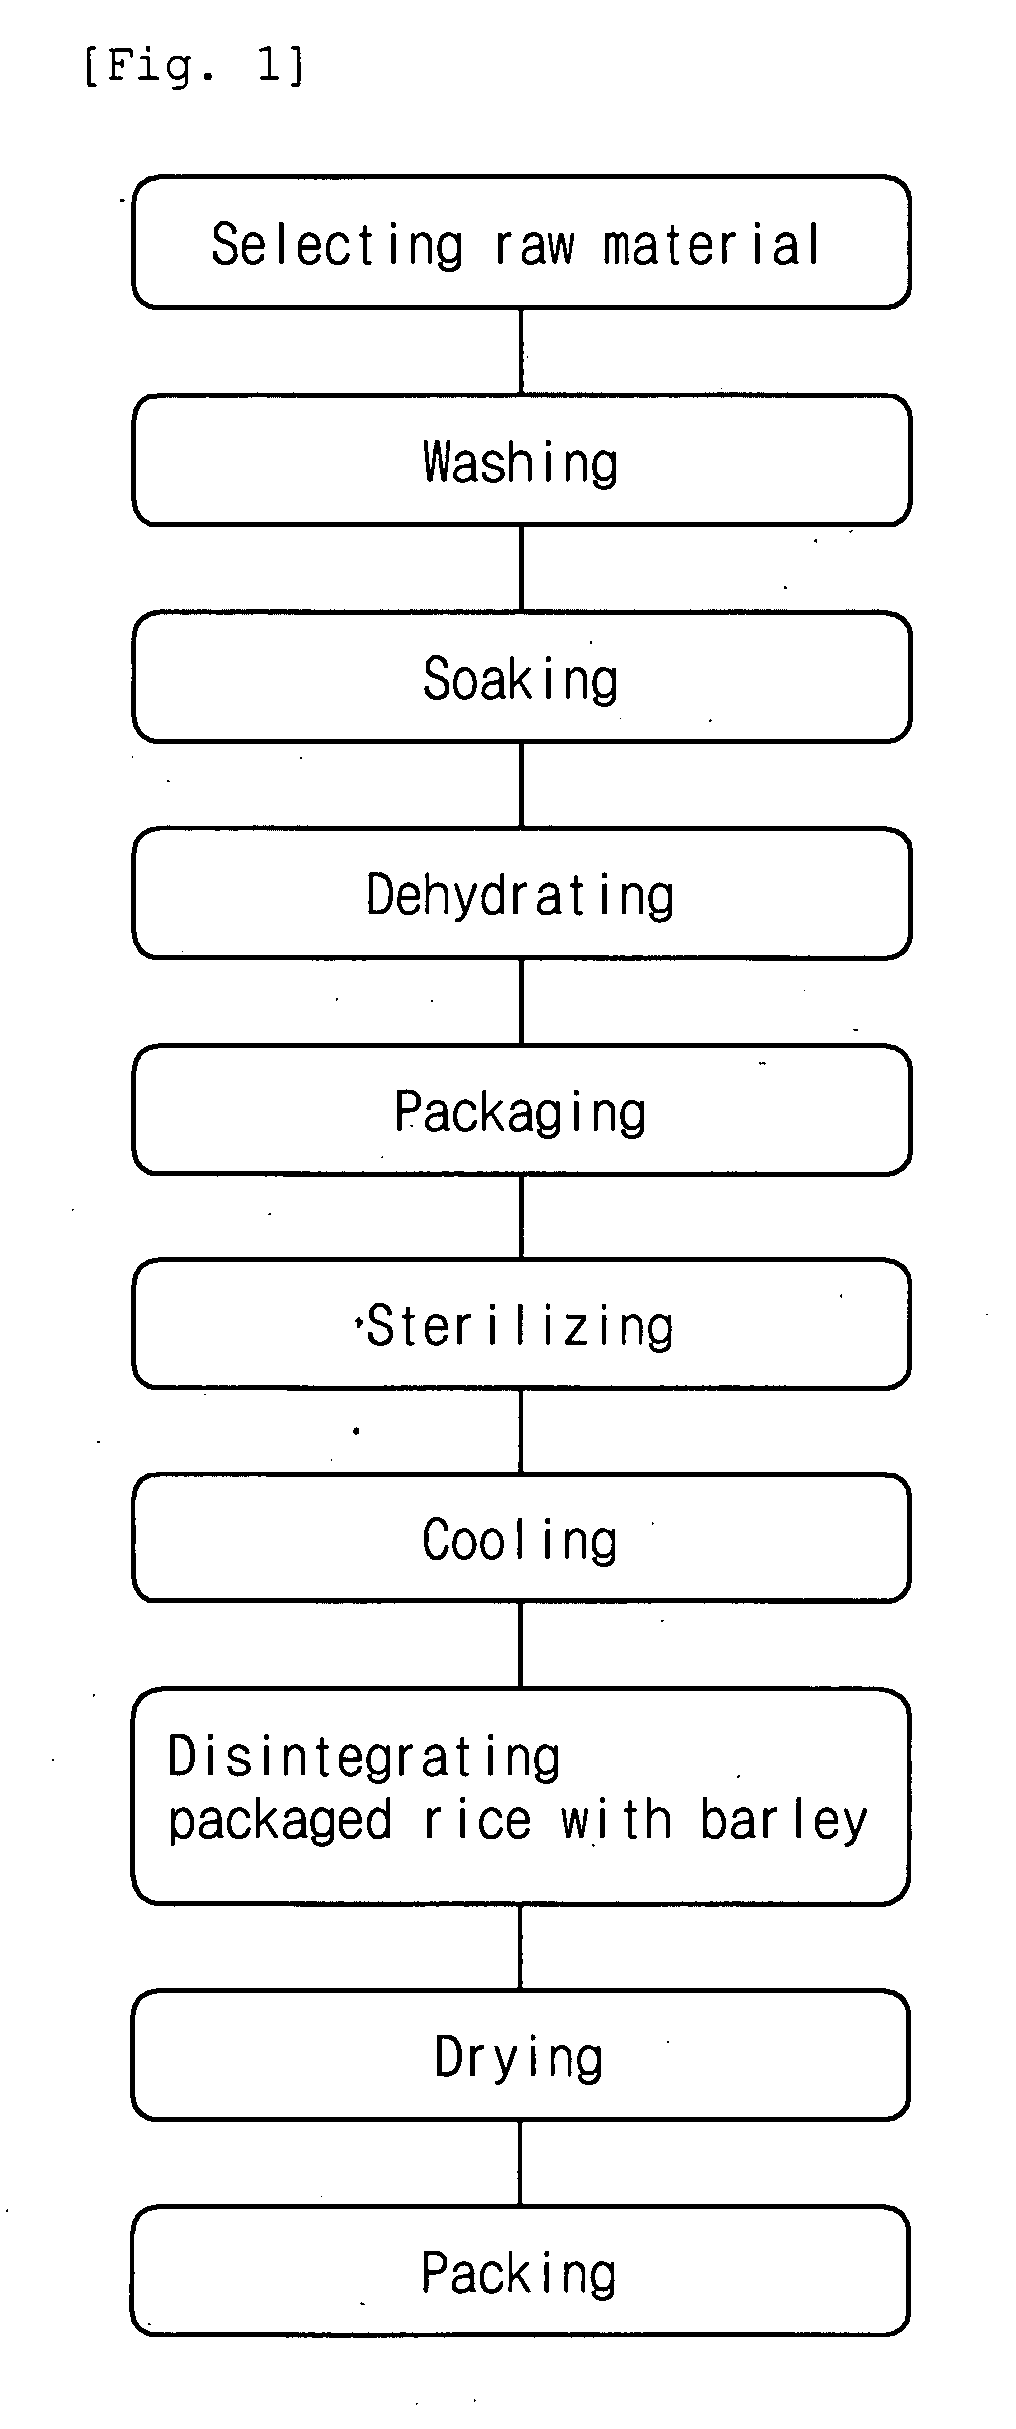 Preparation method of cooked rice with barley in aseptic packing system